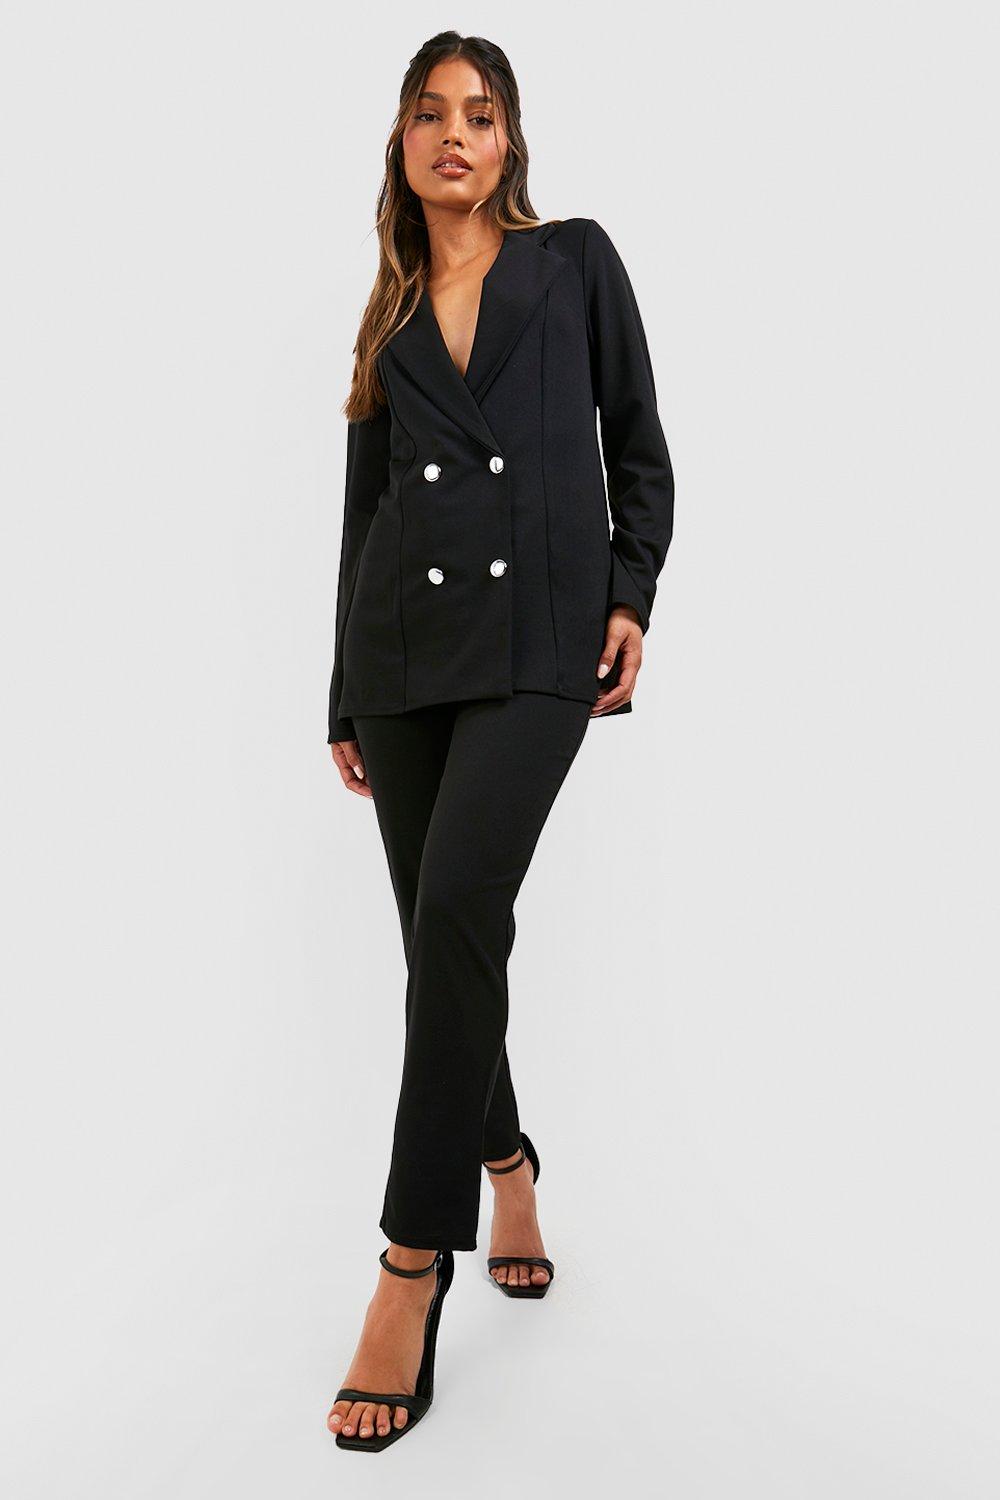 Womens Double Breasted Blazer And Pants Suit Set - Black - 8 | SheFinds